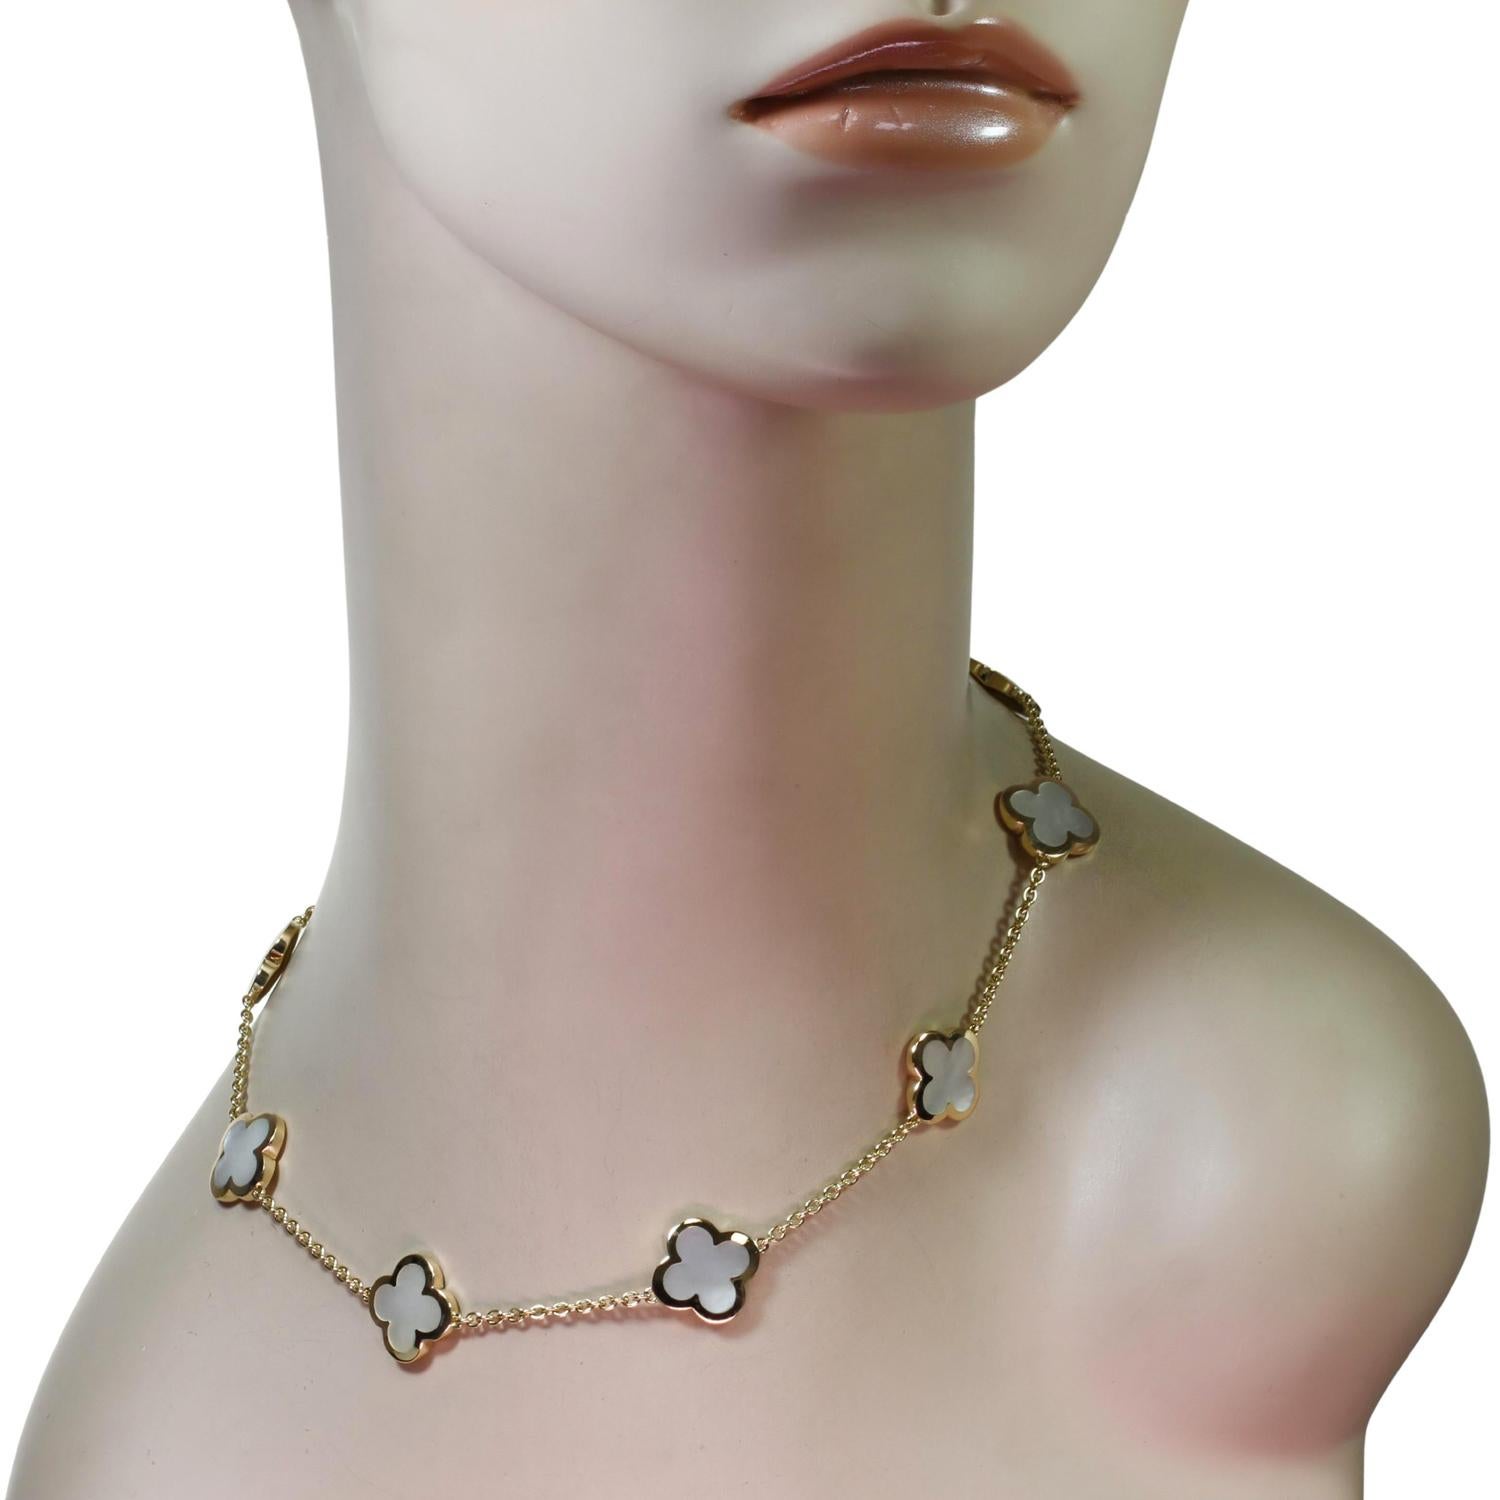 This fabulous Van Cleef & Arpels necklace from the Pure Alhambra collection is crafted in 18k yellow gold and features 9 lucky clover motifs inlaid with mother-of-pearl. Completed with a concealed clasp. Made in France circa 2010s. Measurements: